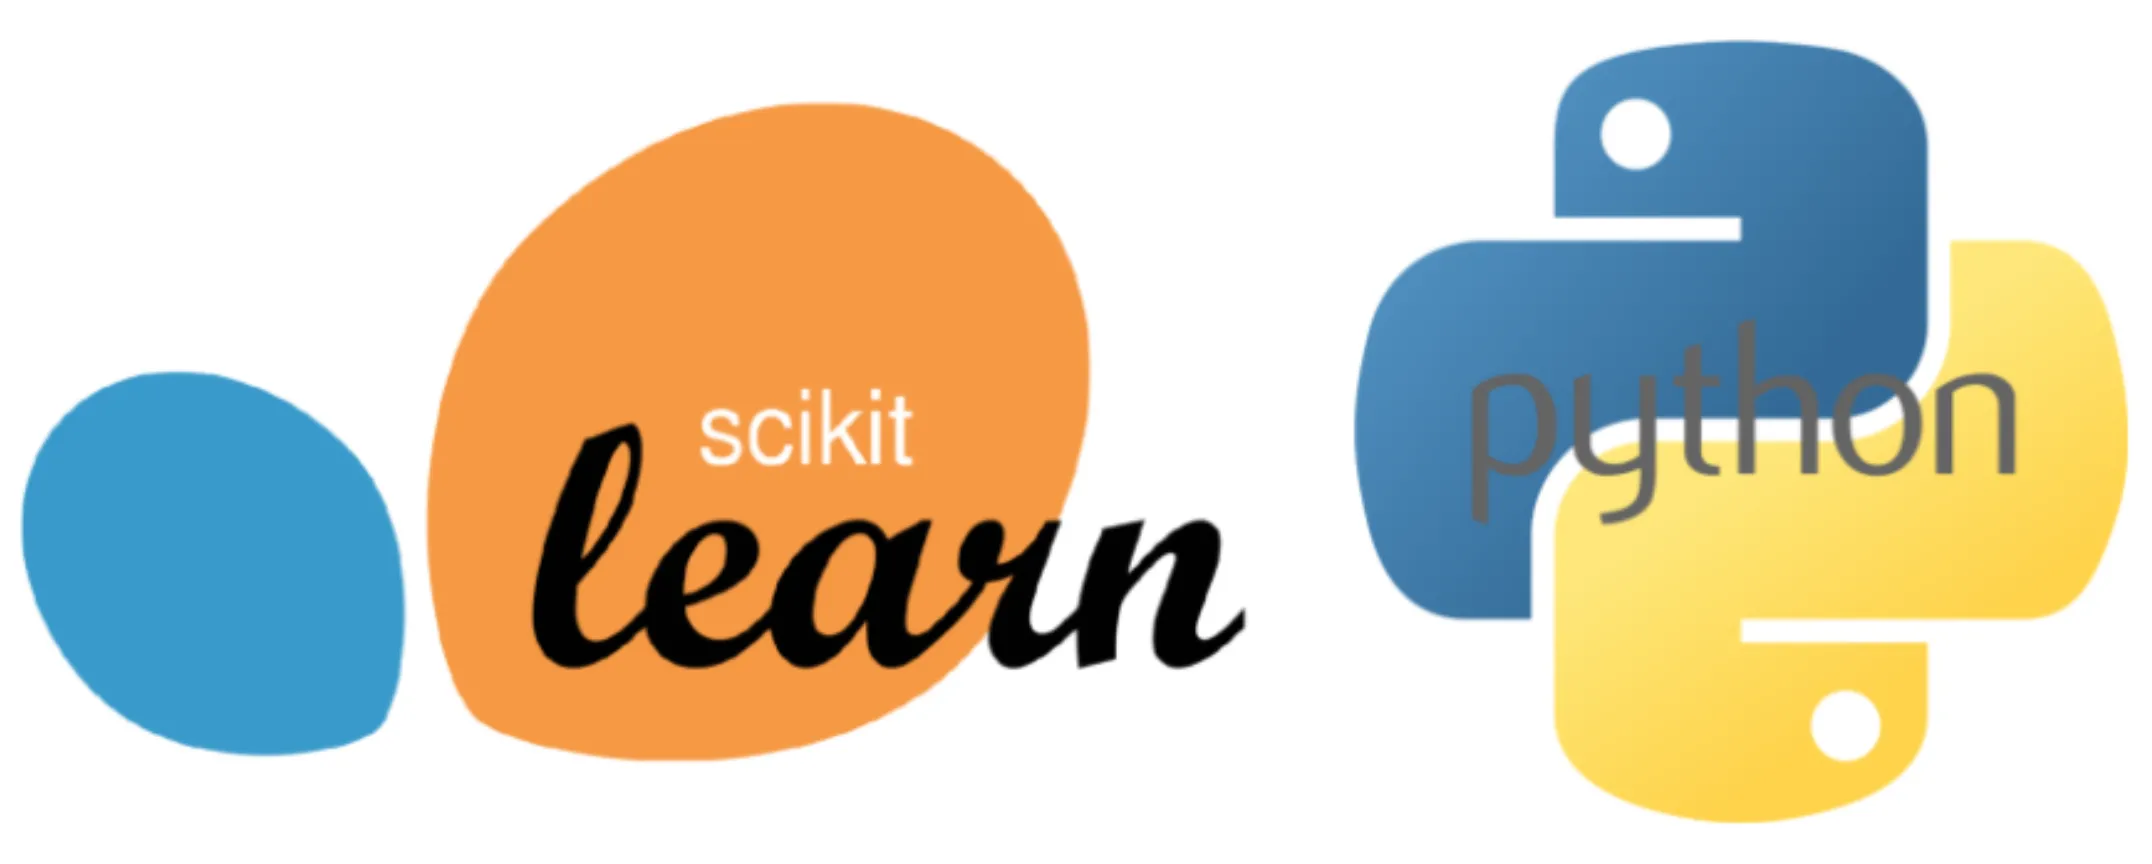 What is Sklearn? | Domino Data Science Dictionary